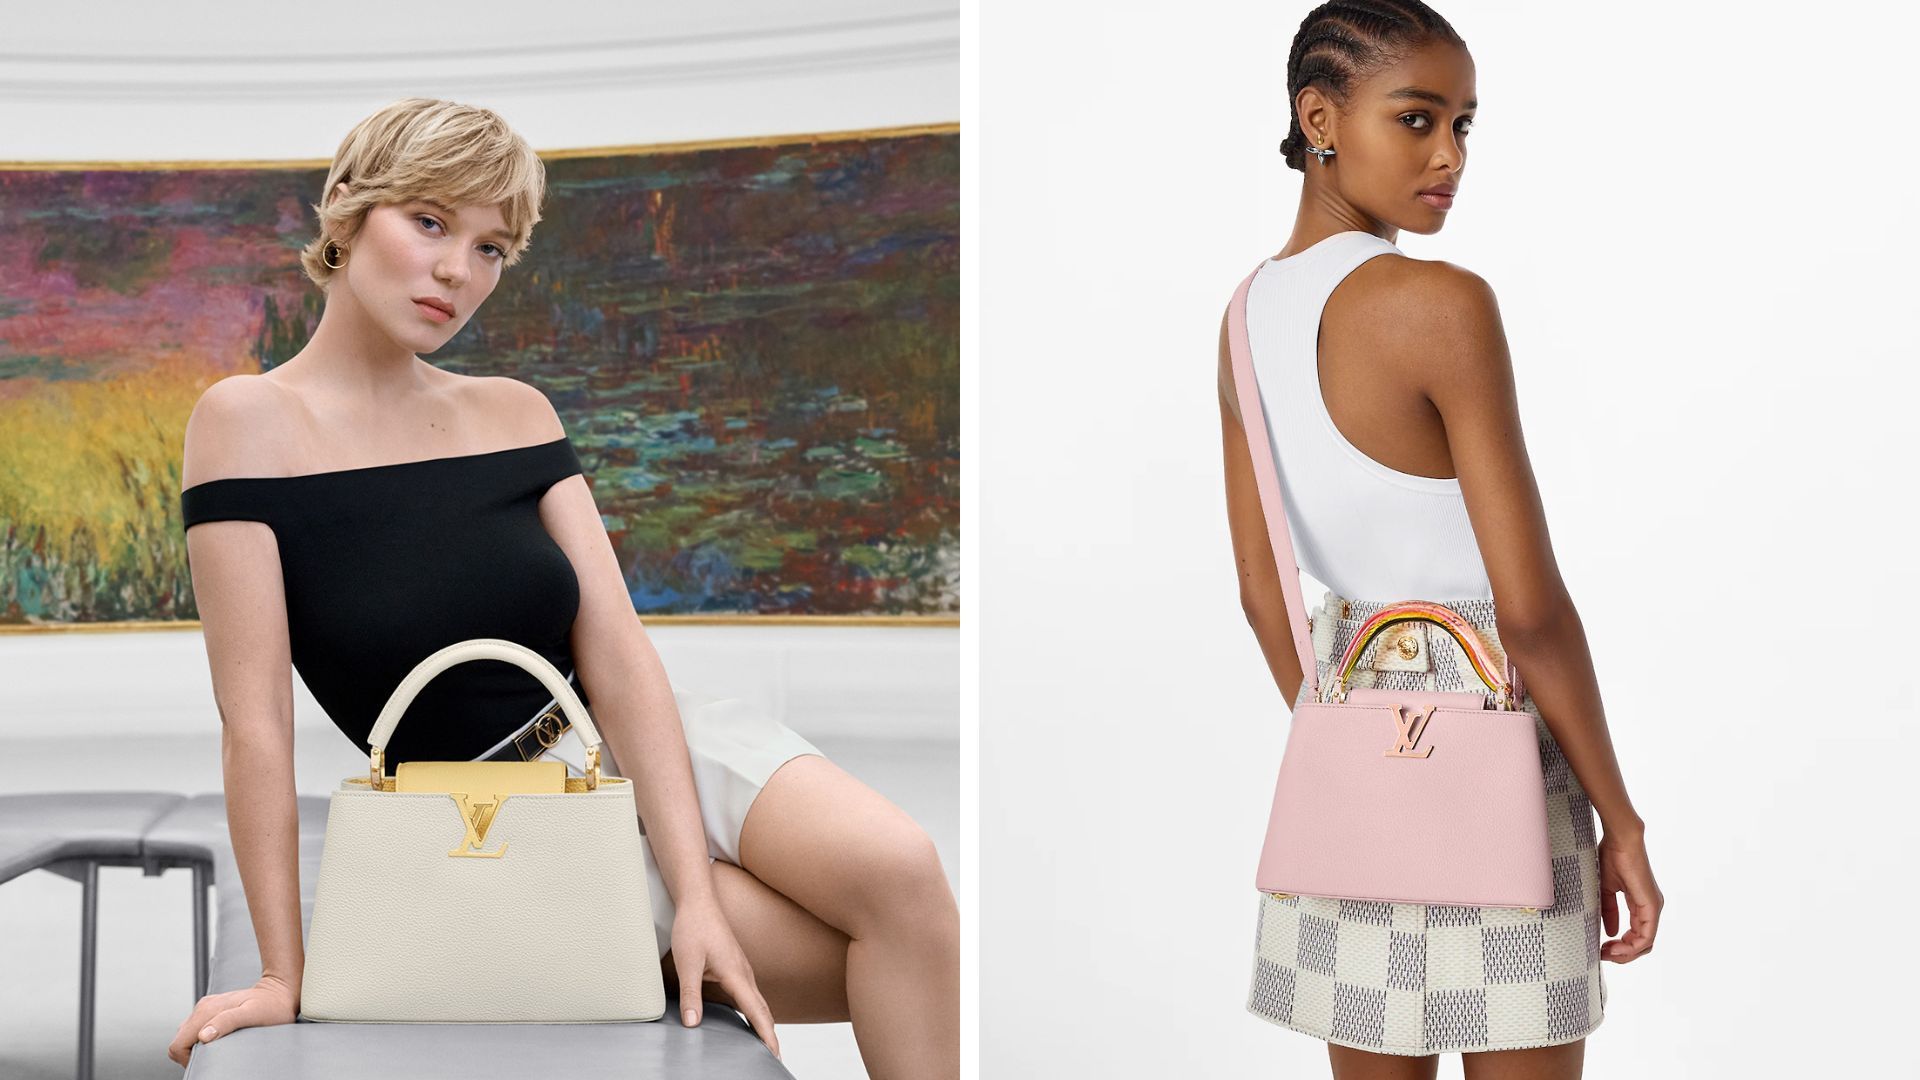 Louis Vuitton Introduces New Bag Styles For 2018 - Spotted Fashion